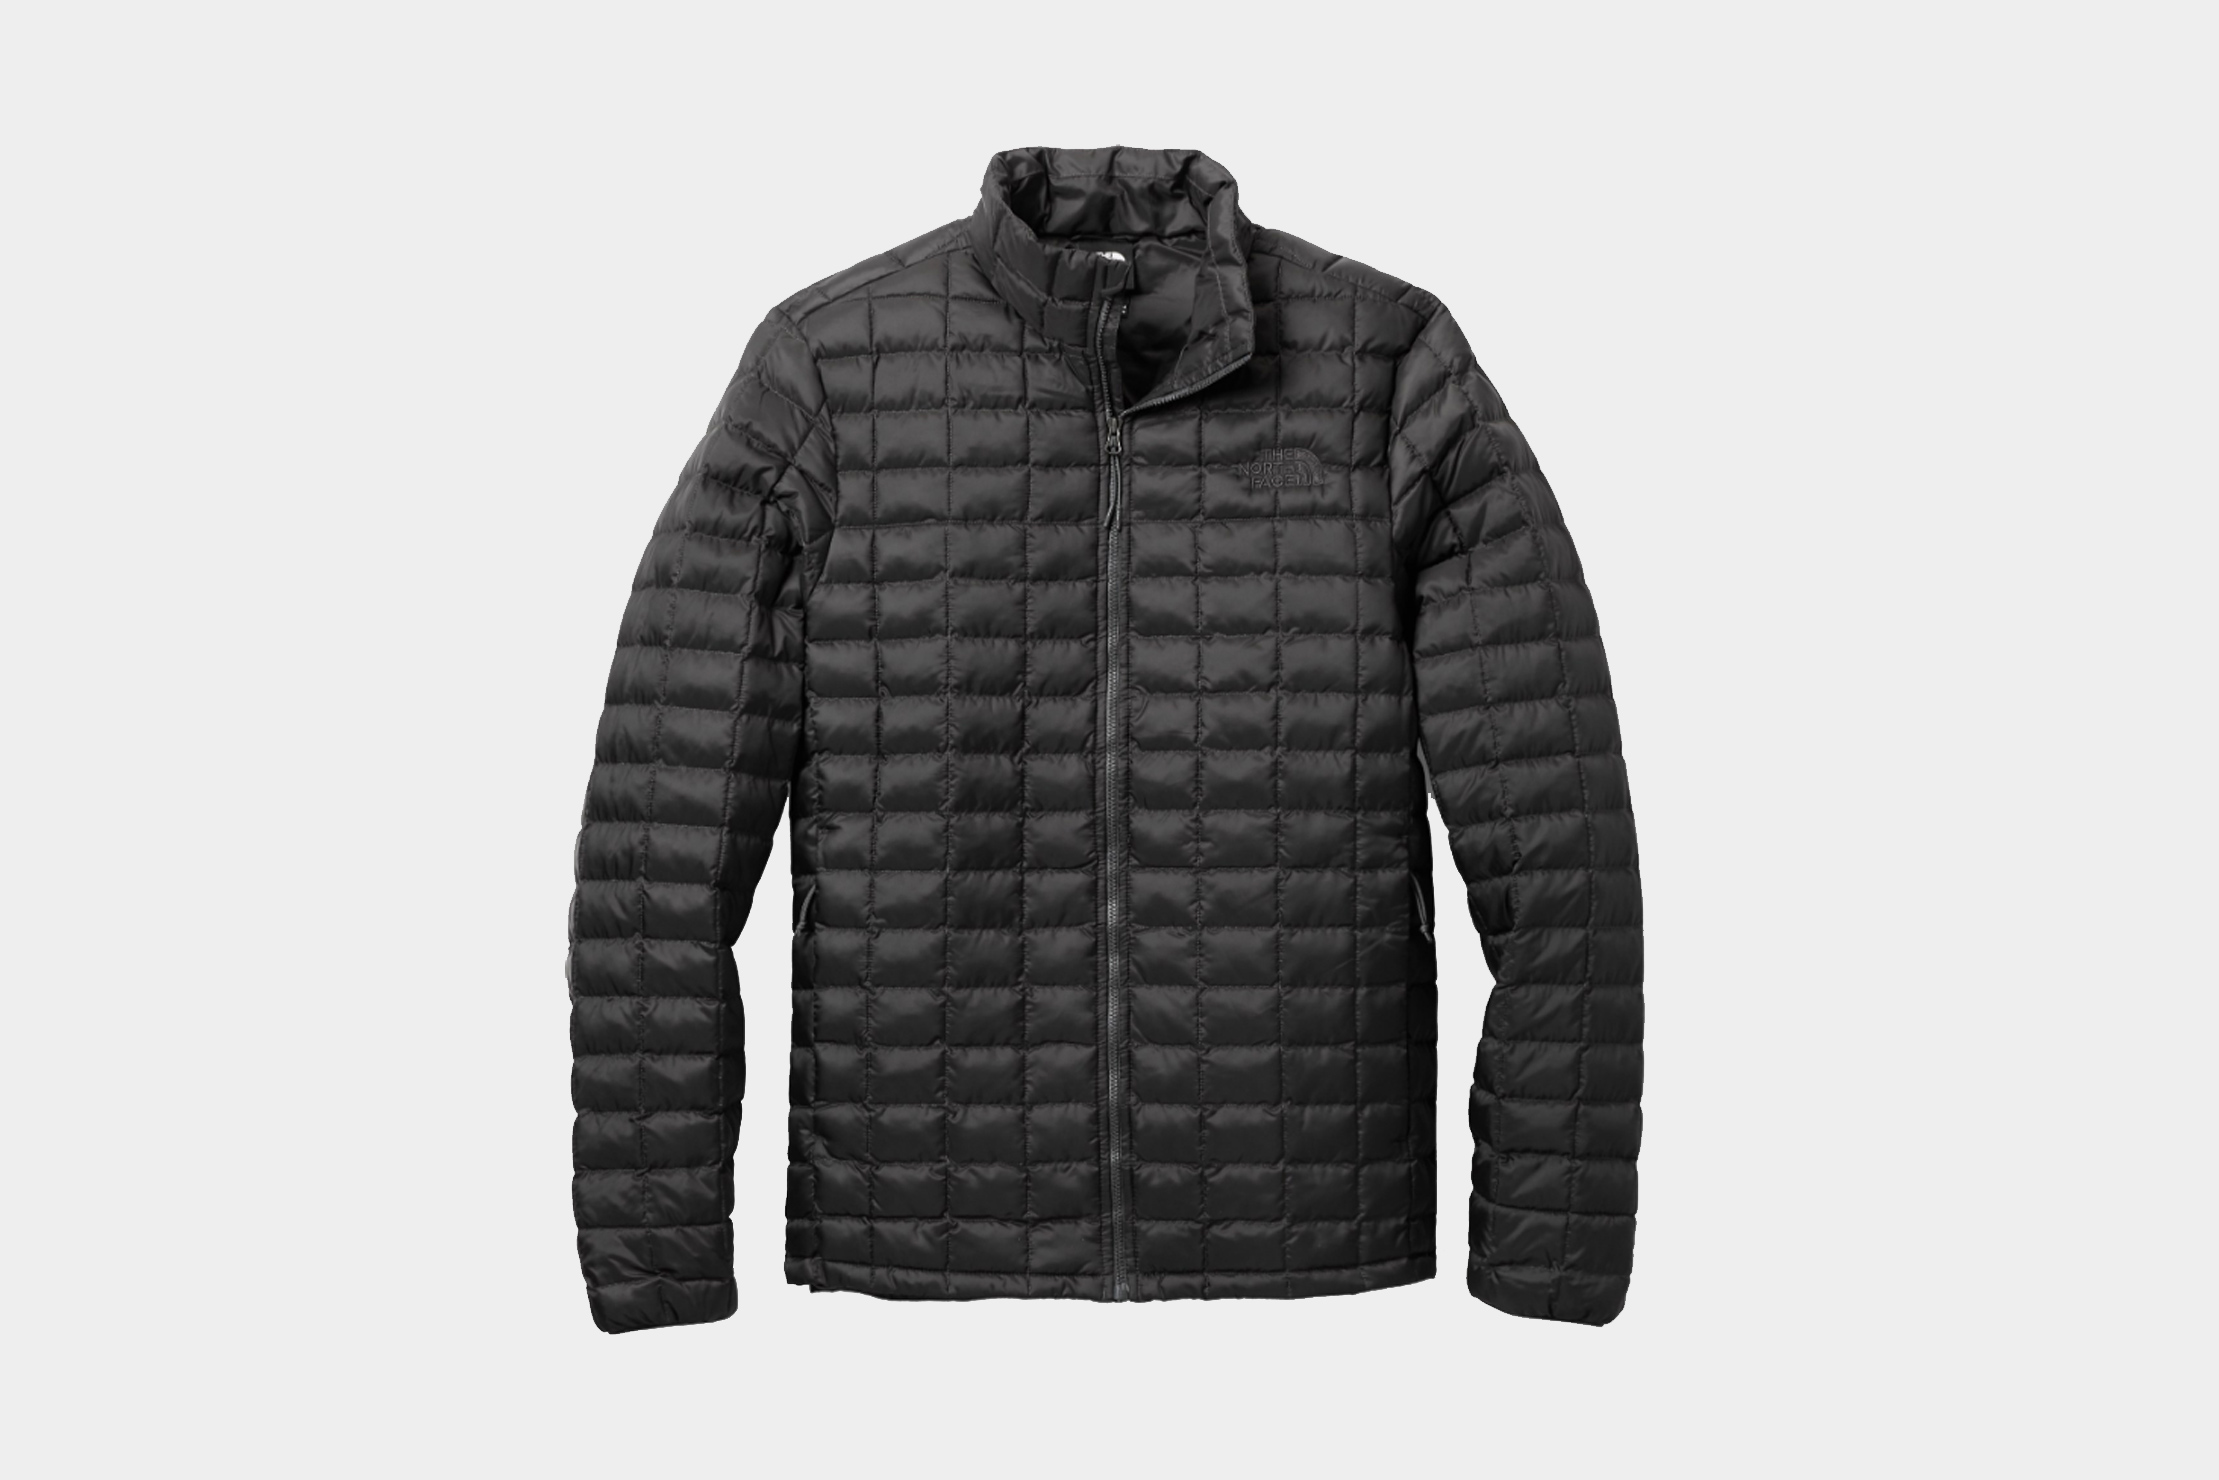 Brand: The North Face | Pack Hacker